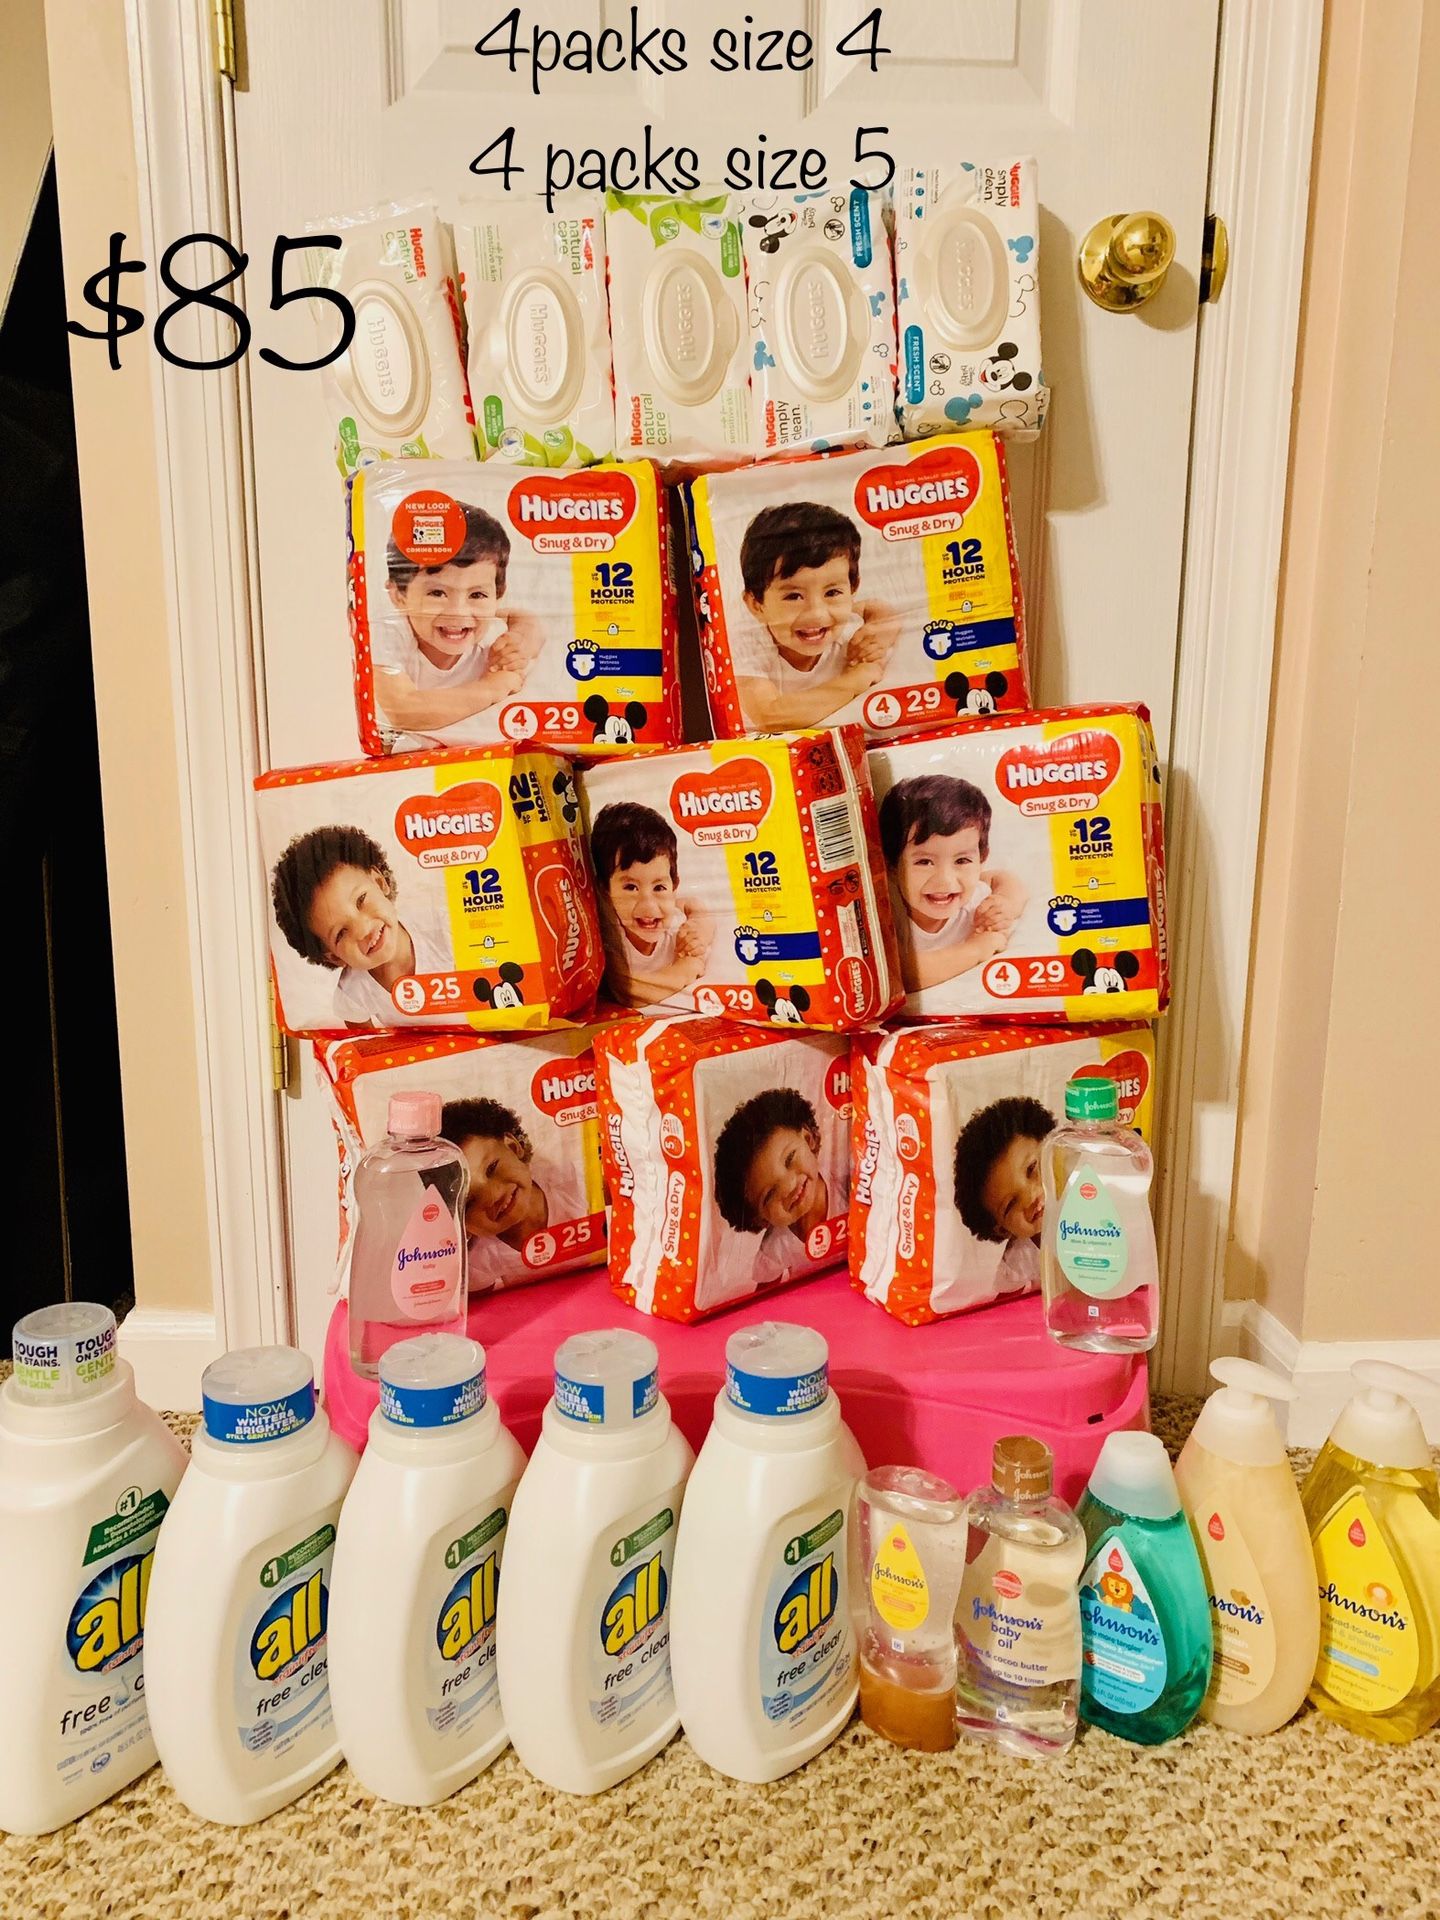 Diapers/Wipes/Laundry Detergent